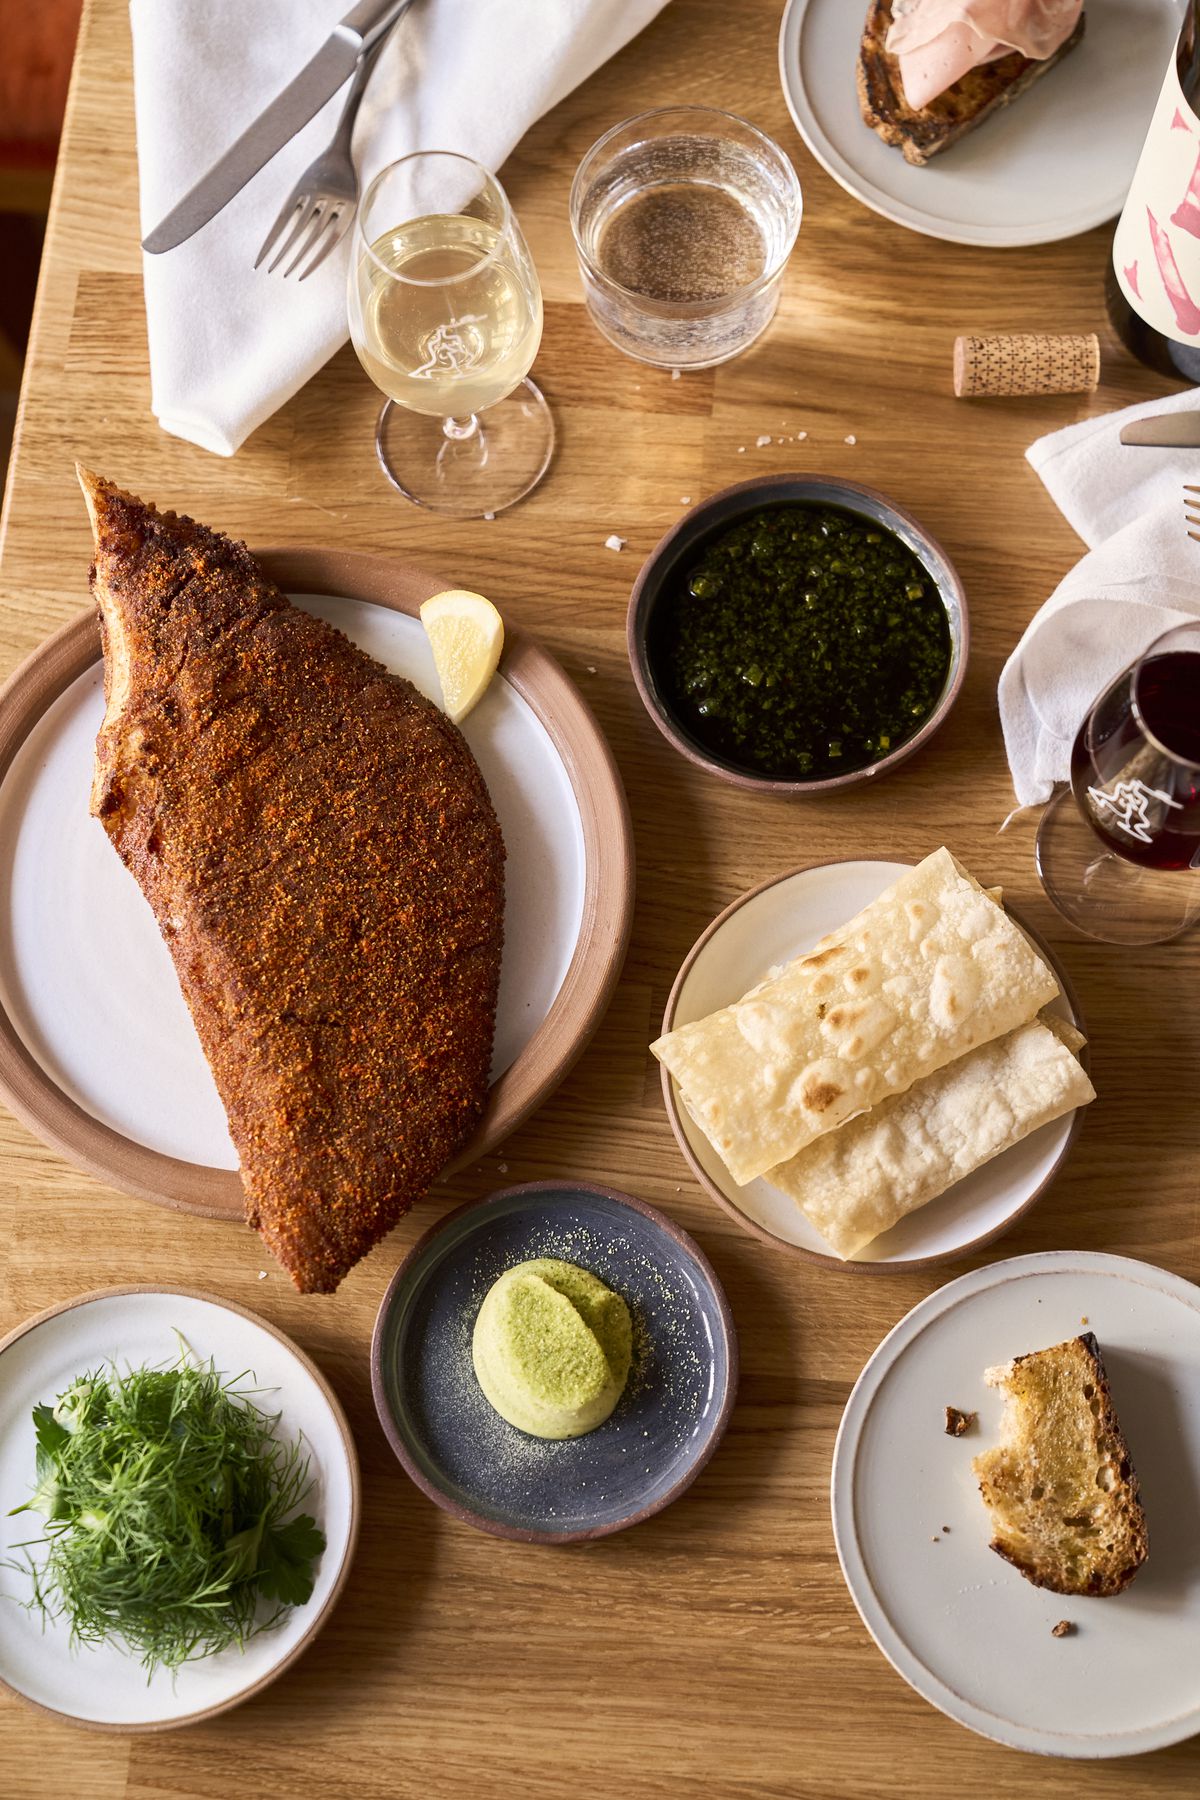 An overhead photograph of a fried skate wing and other dishes at Place des Fêtes, a wine bar in Clinton Hill, Brooklyn.